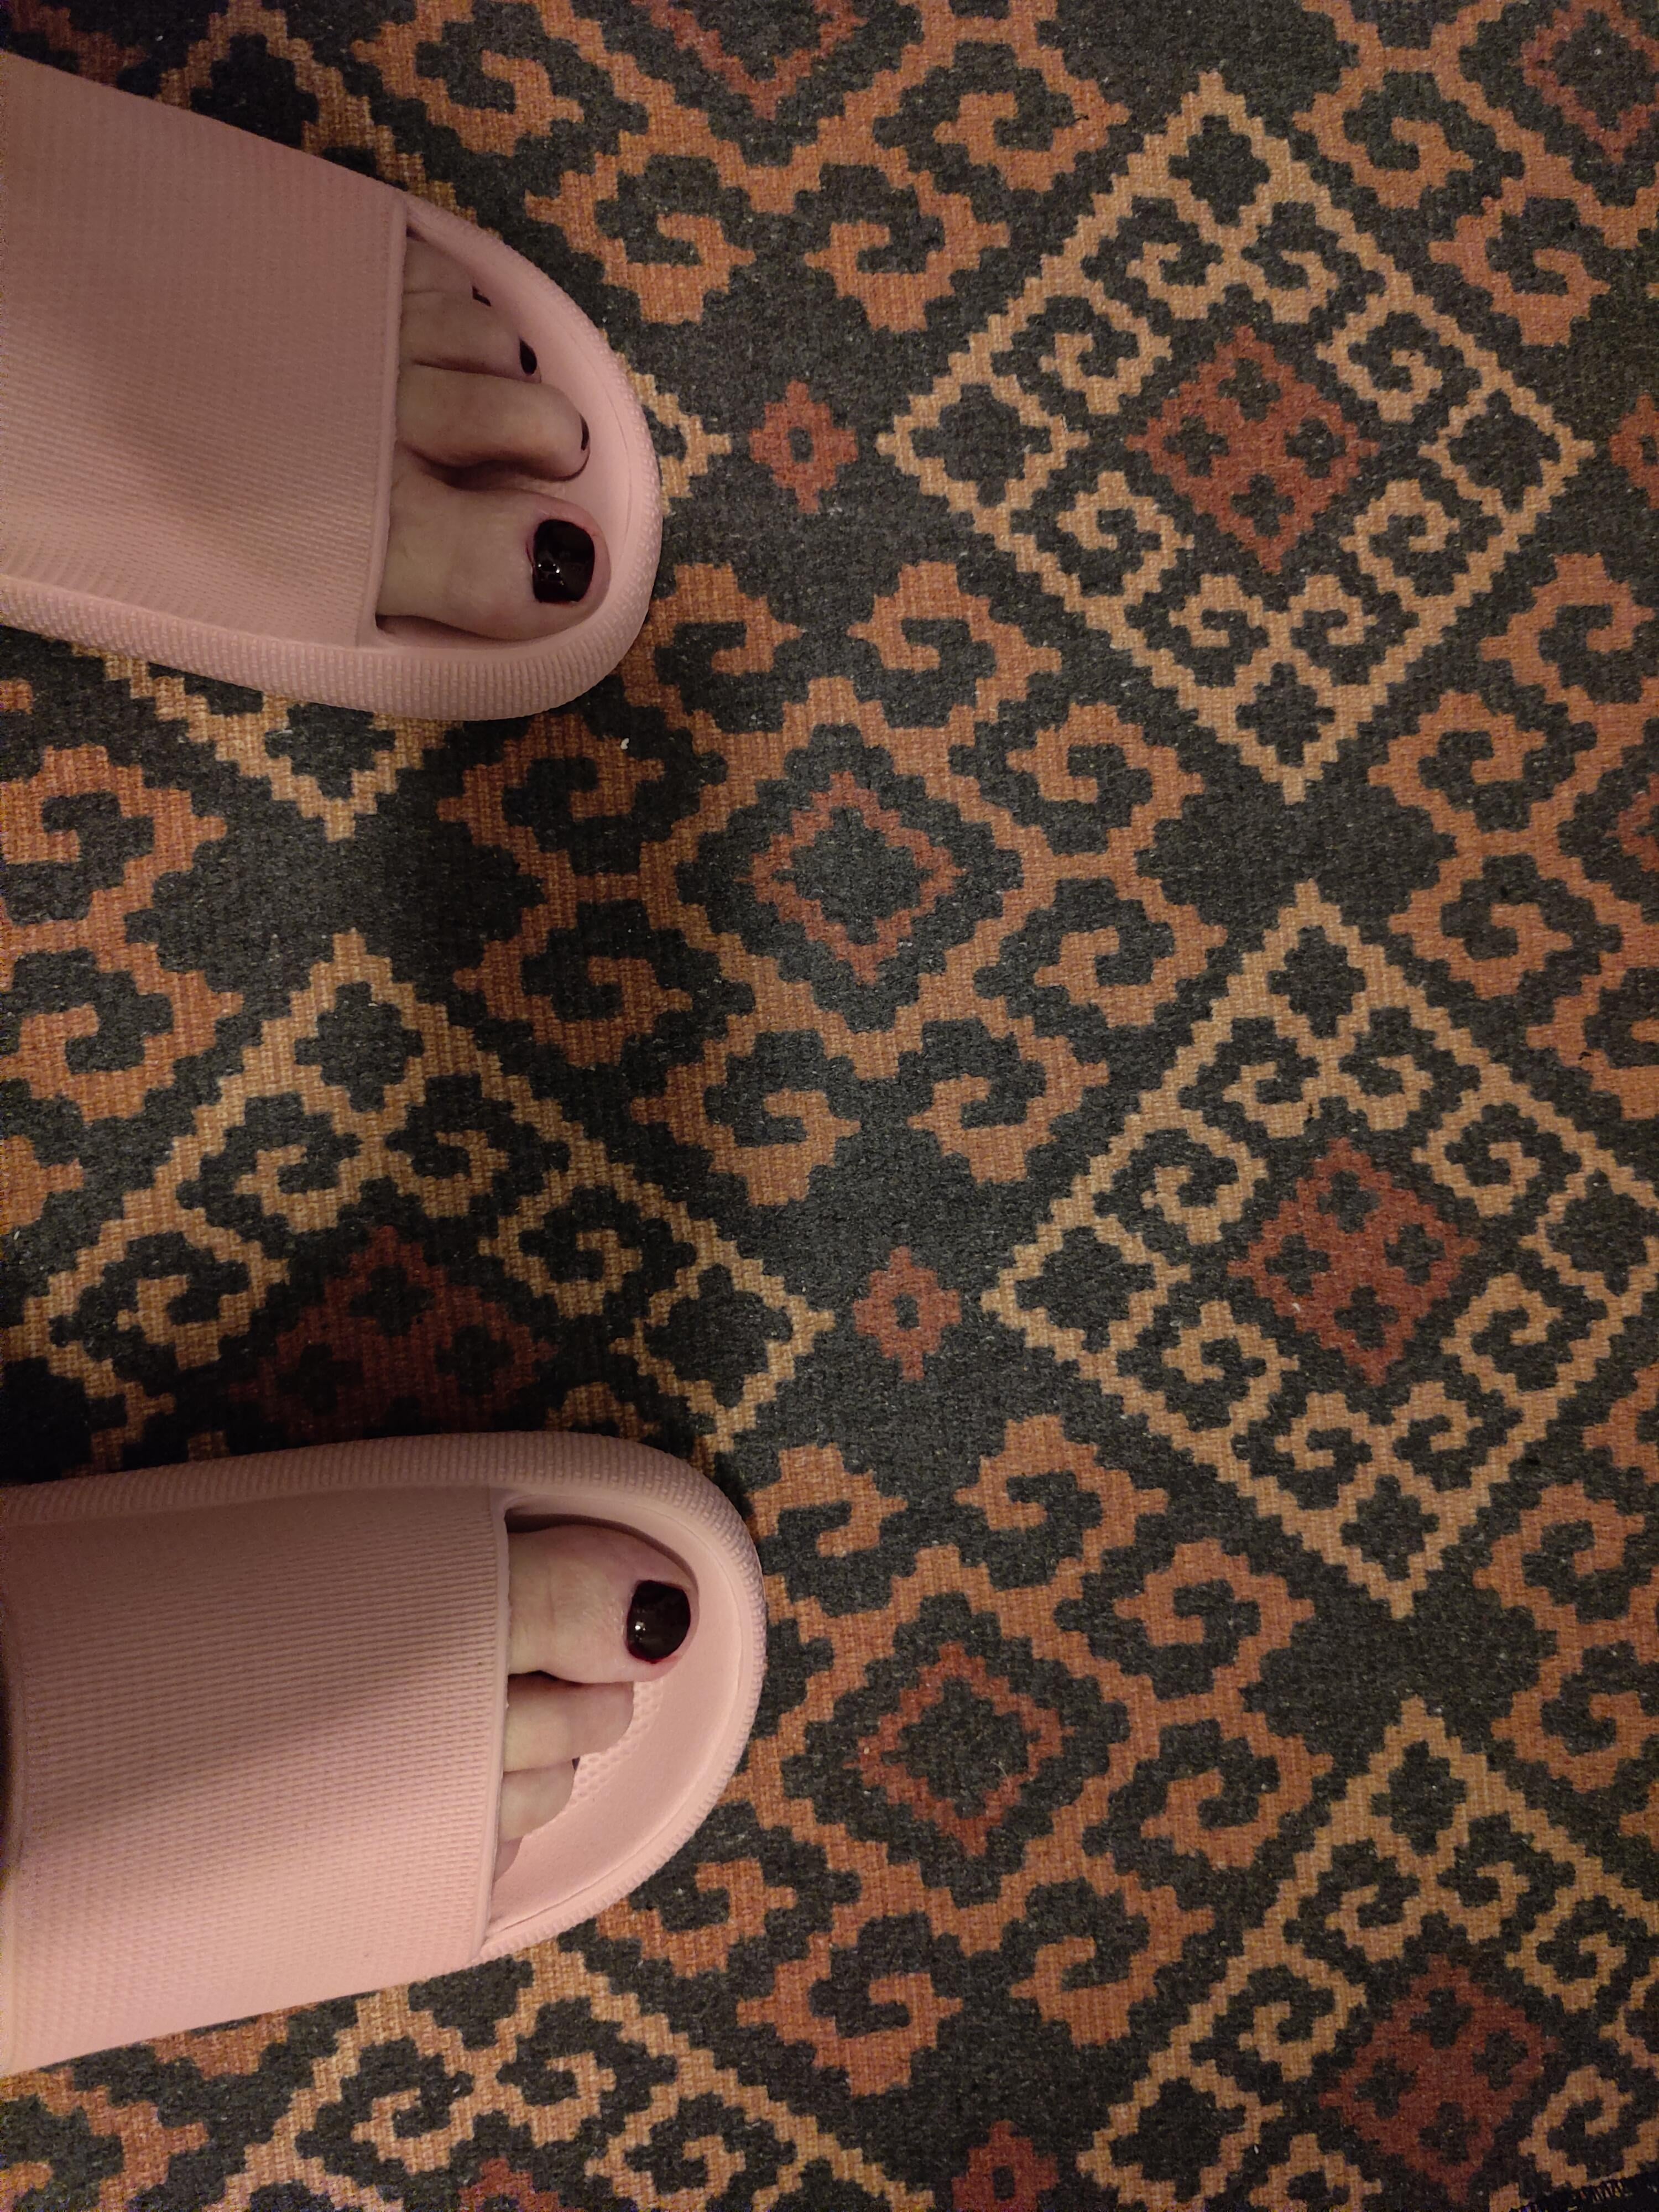 Fresh pedicure for the first time and new slippers